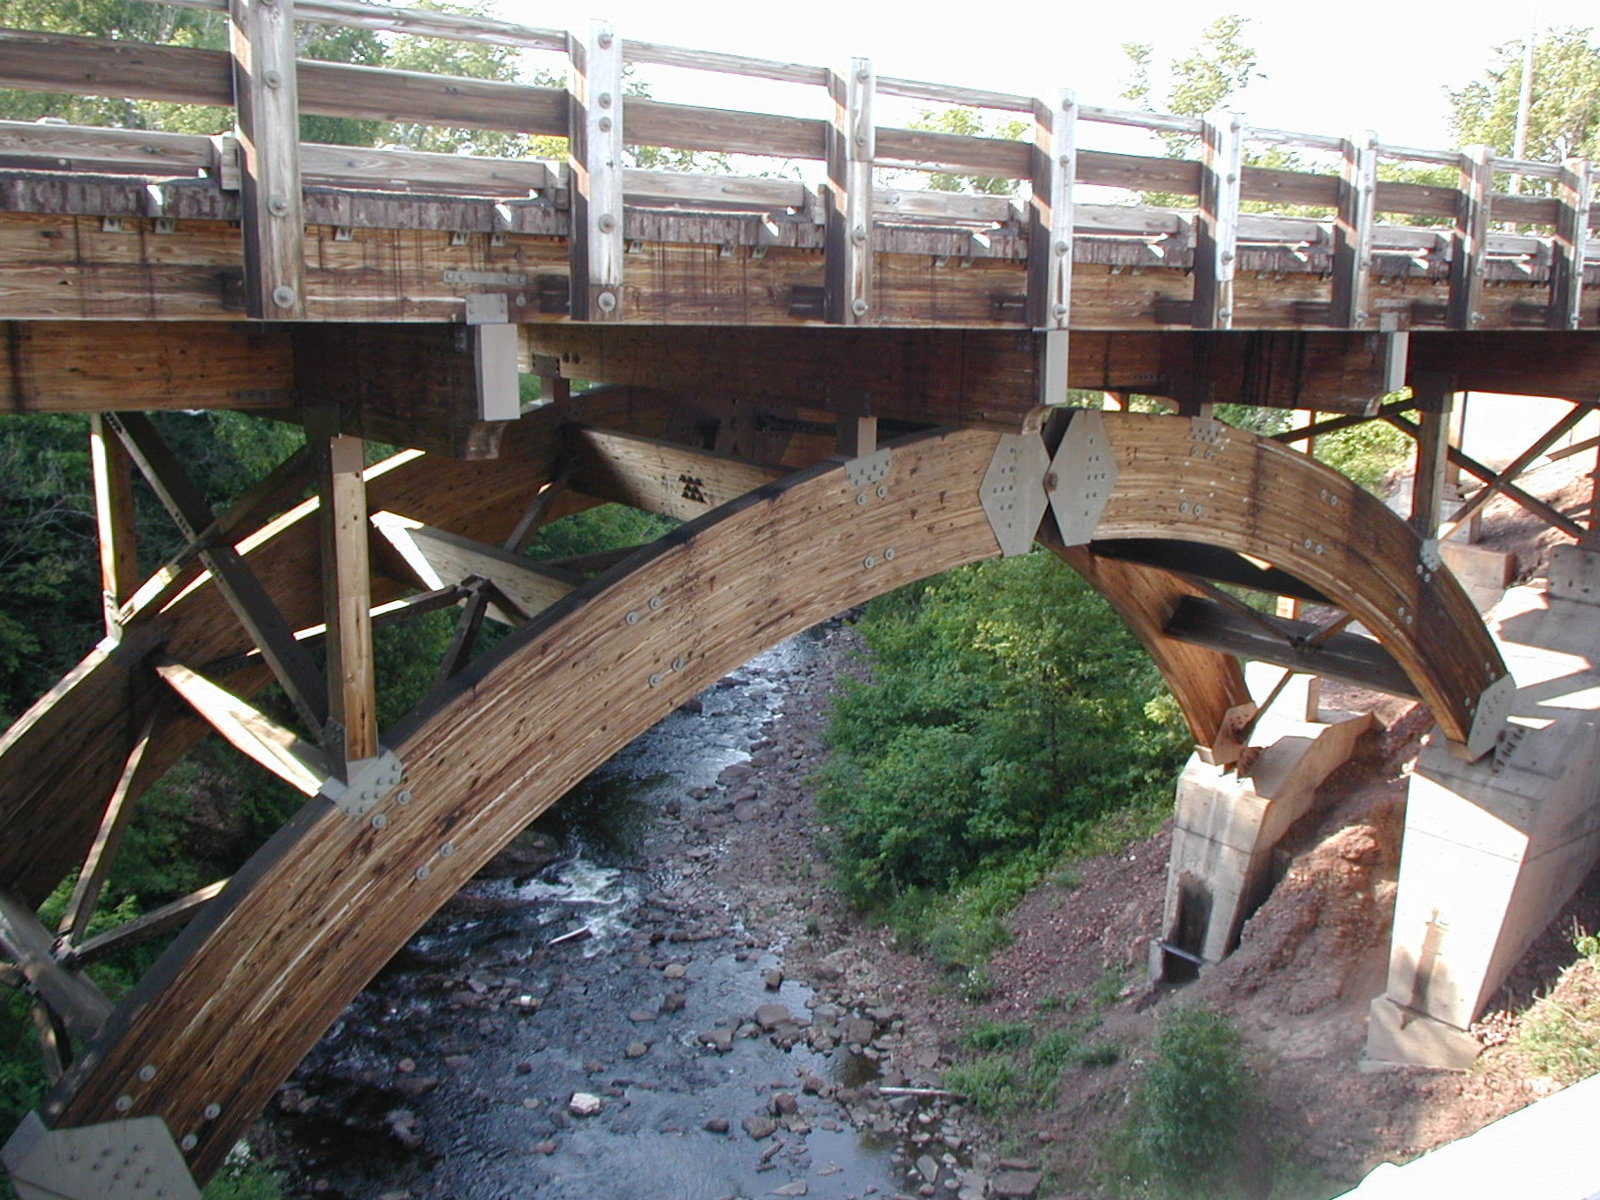 Railroad Bridge inspections in National Parks